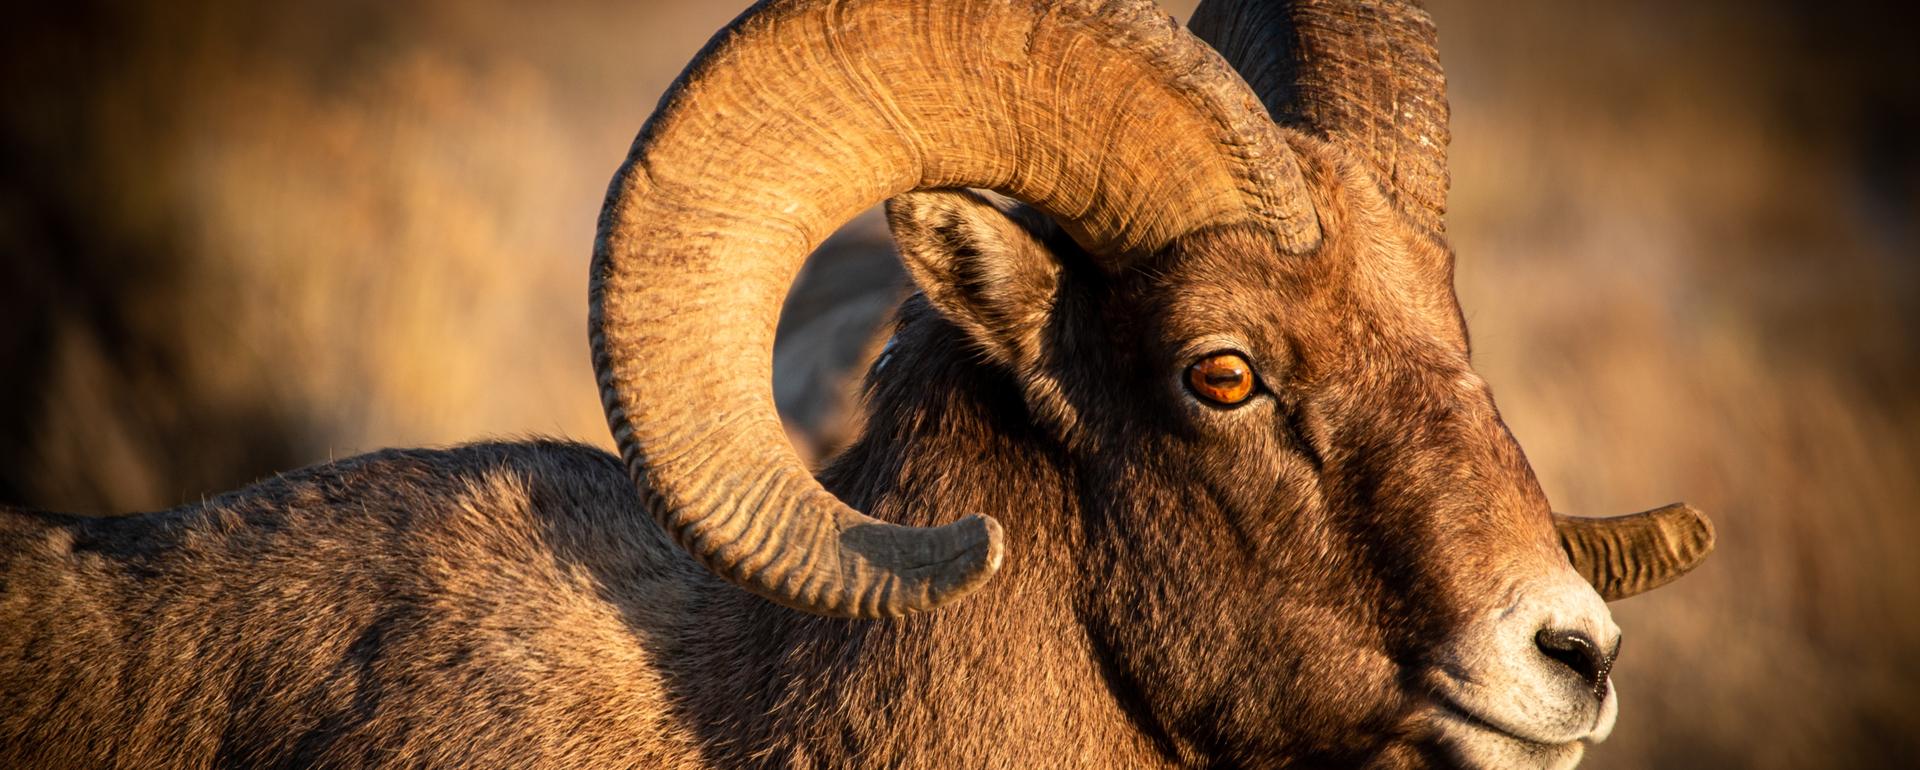 Few bighorns worry about how to spend their leisure time